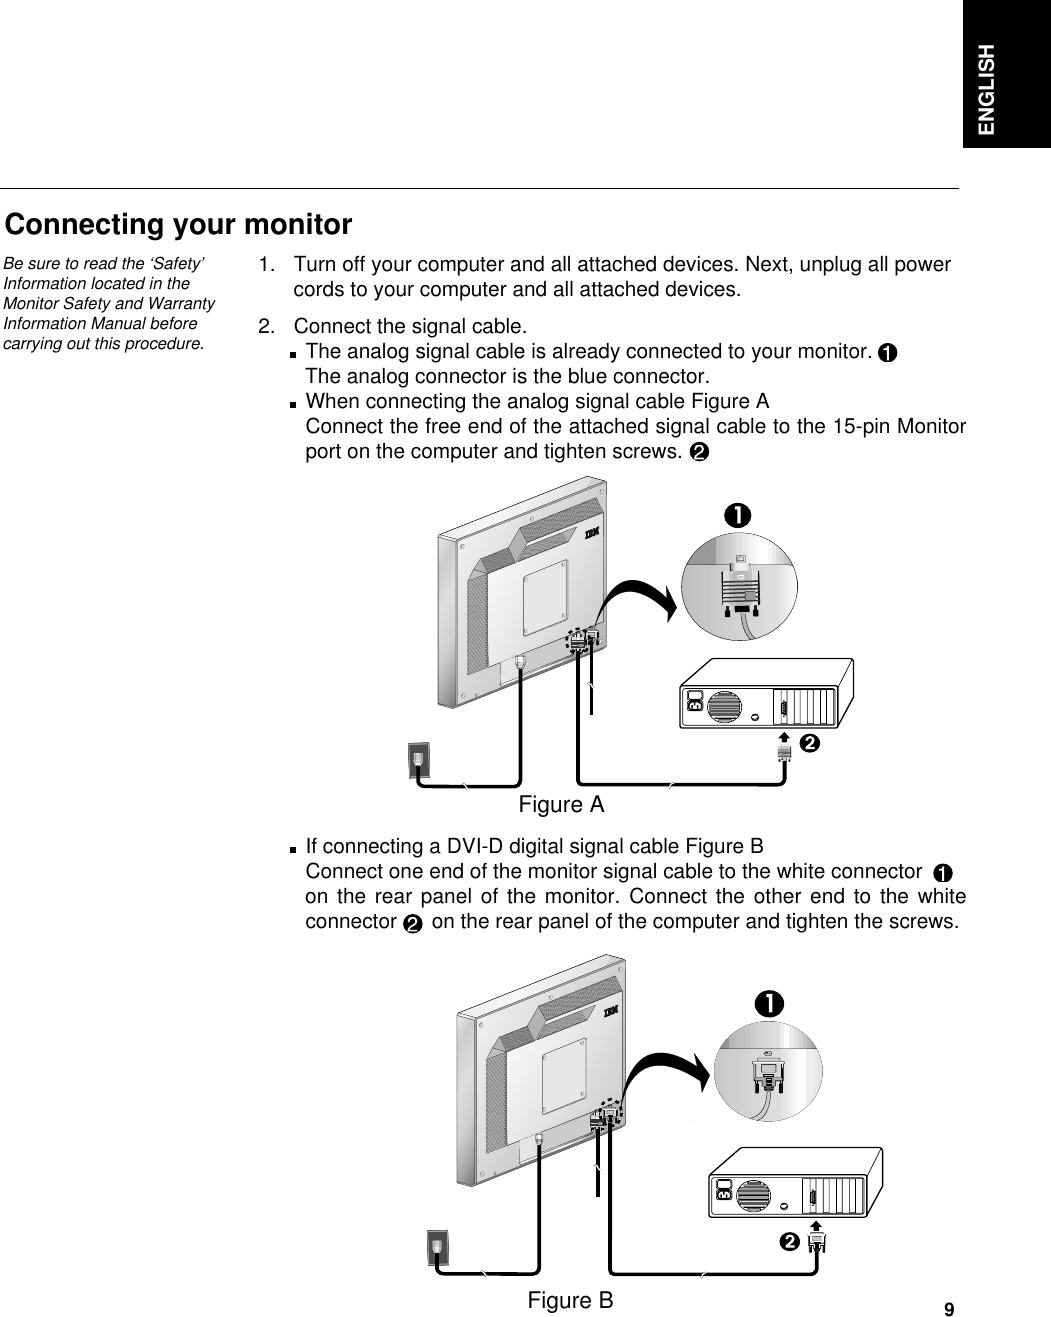 ENGLISH9Connecting your monitor1. Turn off your computer and all attached devices. Next, unplug all powercords to your computer and all attached devices.2. Connect the signal cable.The analog signal cable is already connected to your monitor.The analog connector is the blue connector.    When connecting the analog signal cable Figure AConnect the free end of the attached signal cable to the 15-pin Monitorport on the computer and tighten screws.If connecting a DVI-D digital signal cable Figure BConnect one end of the monitor signal cable to the white connectoron the rear panel of the monitor. Connect the other end to the whiteconnector on the rear panel of the computer and tighten the screws.Figure BFigure ABe sure to read the ‘Safety’Information located in theMonitor Safety and WarrantyInformation Manual beforecarrying out this procedure.